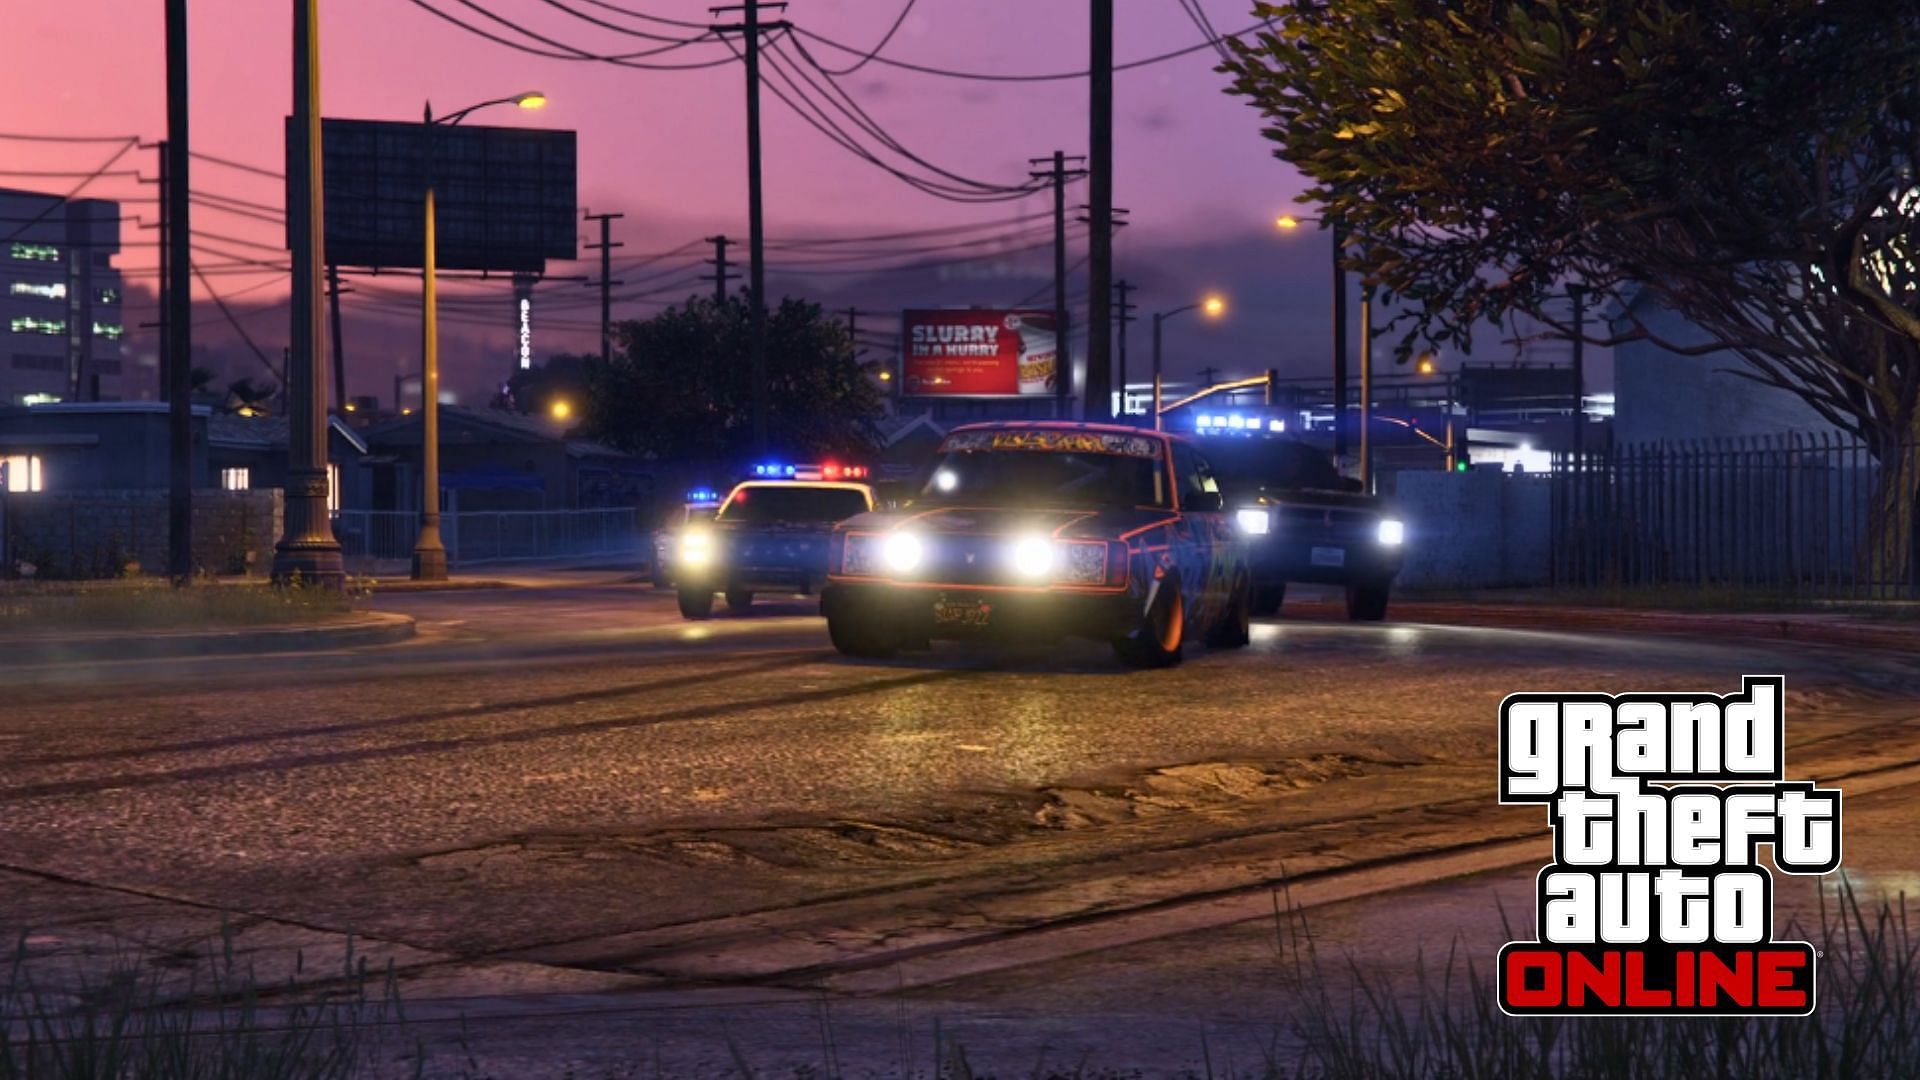 Cops &amp; Crooks Fans go crazy seeing the new GTA Online Bottom Dollar Bounties trailer